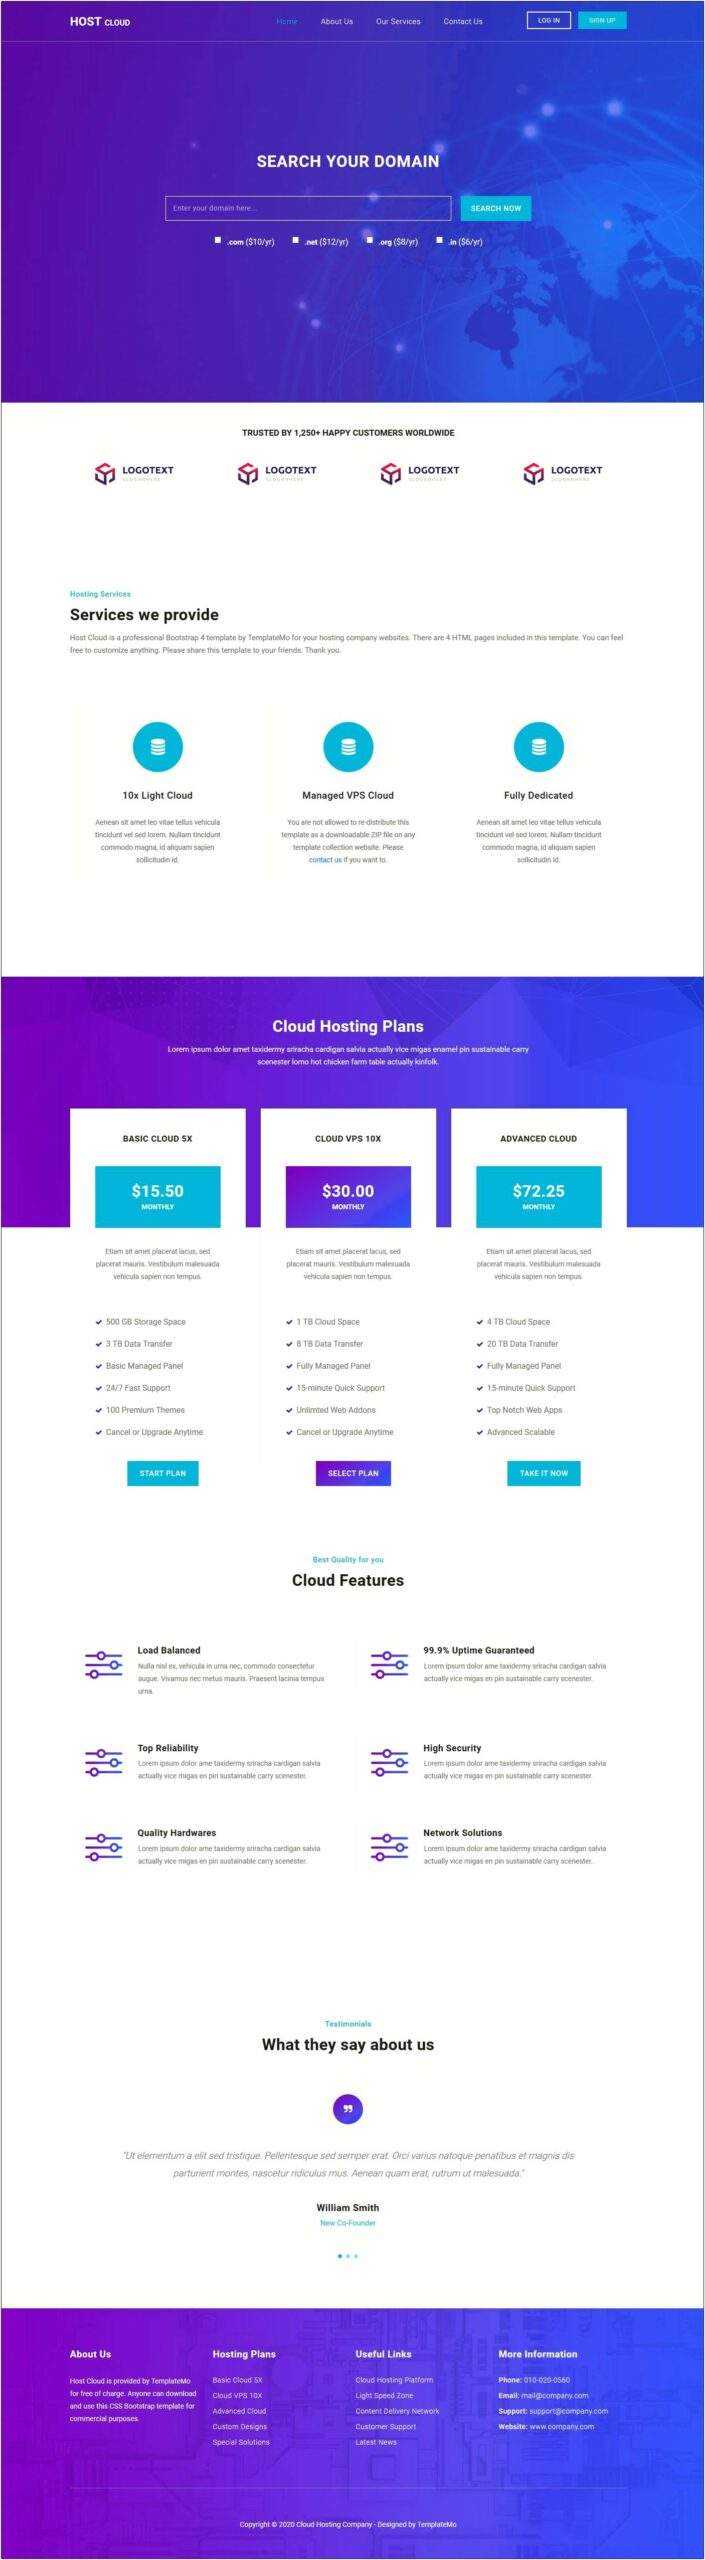 Free Css Templates For Cloud Computing